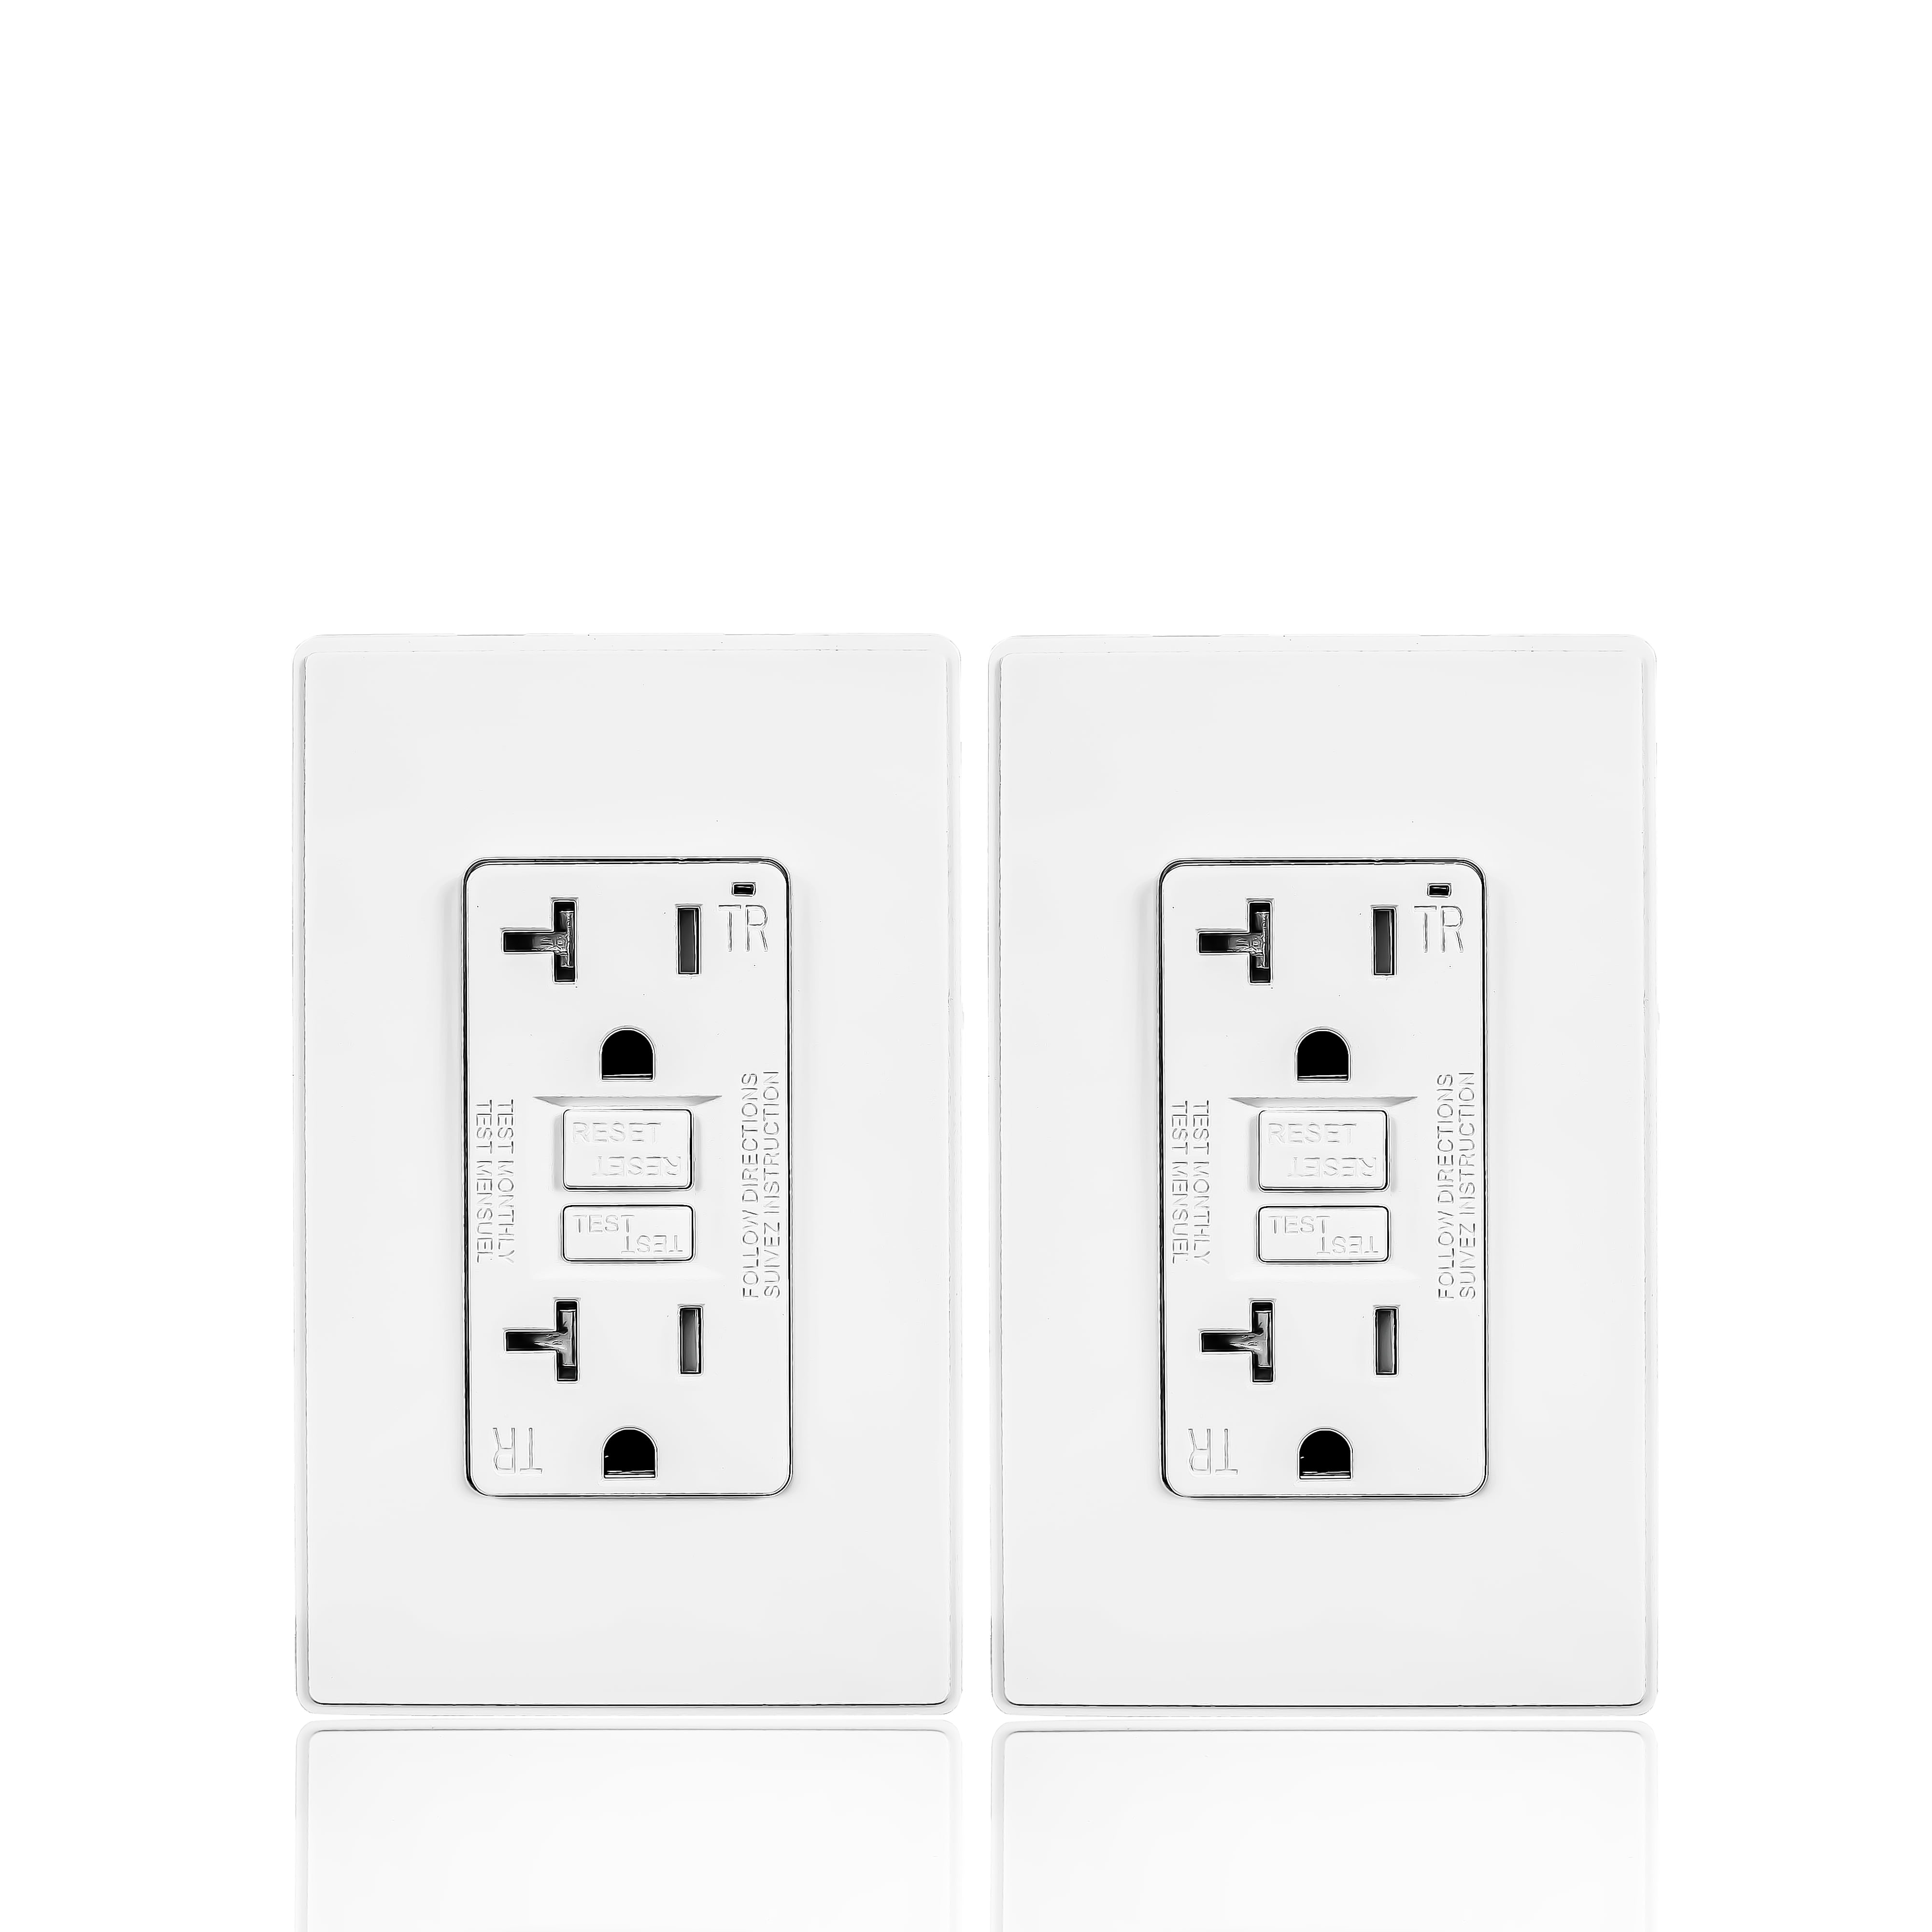 15A UL Listed 20A AMP GFCI GFI Safety Outlet Receptacle w/ Wall Plate White 